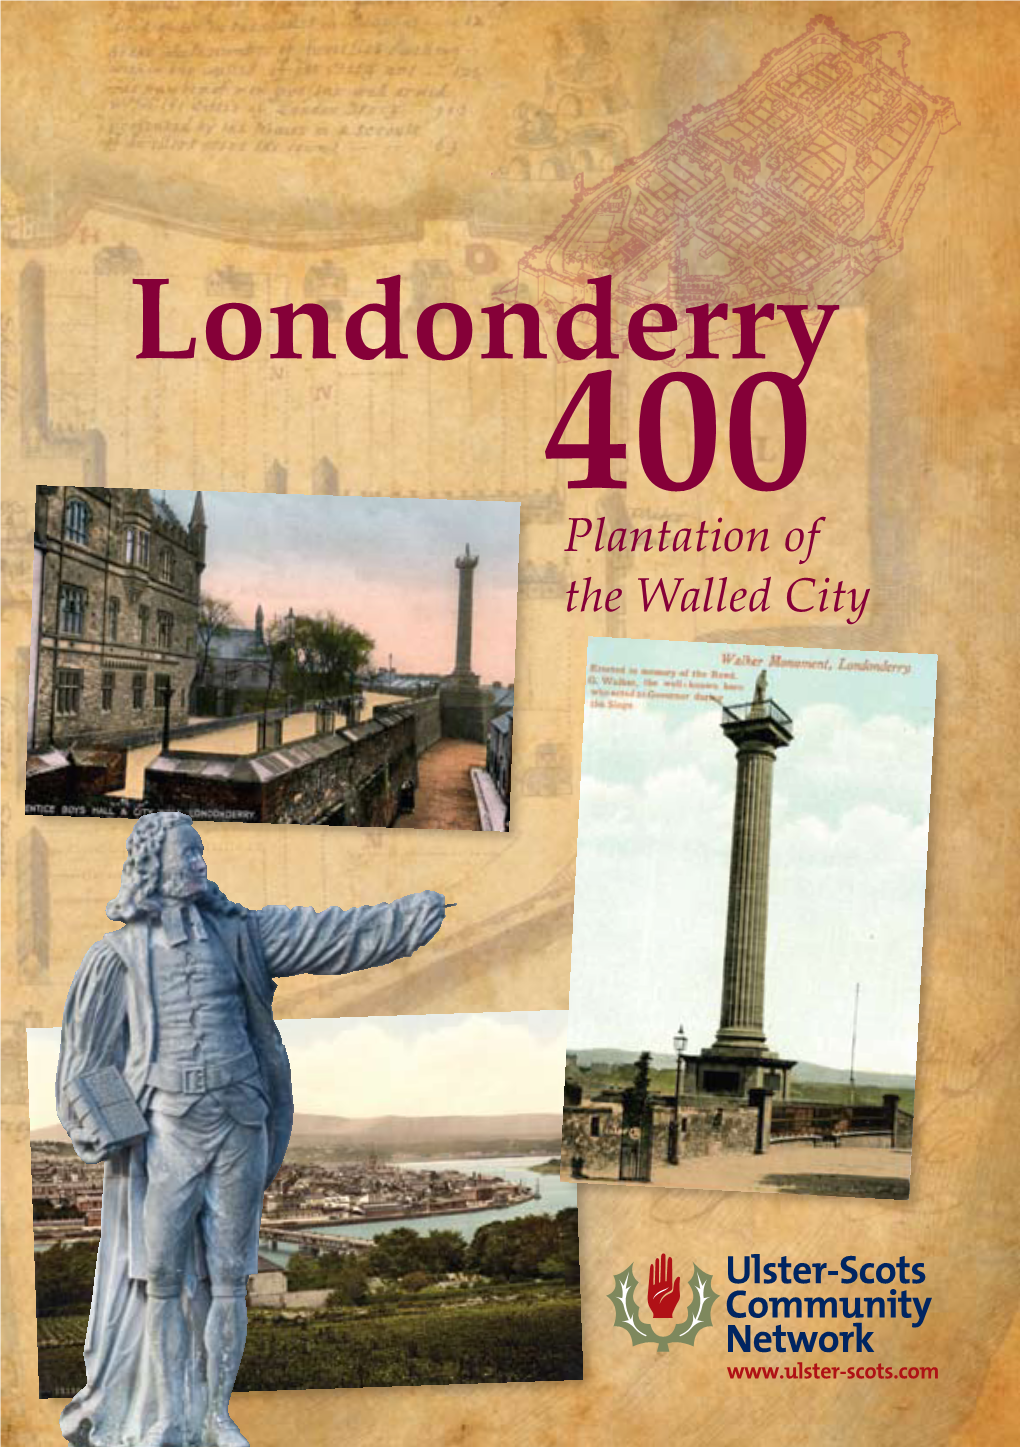 LONDONDERRY 400: Plantation of the Walled City